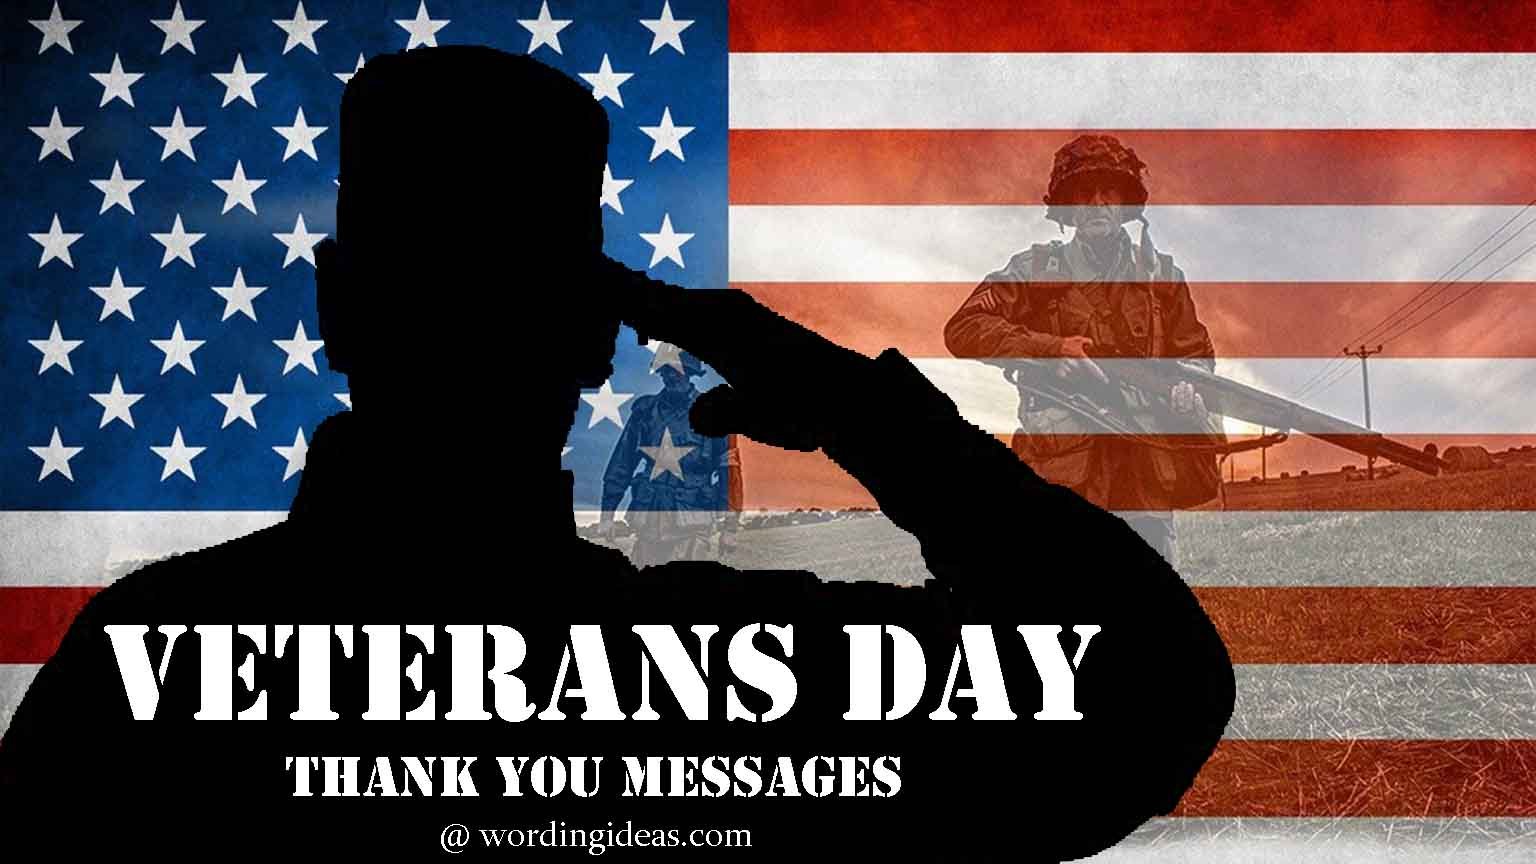 Veterans Day Thank You Messages and Quotes » Wording Ideas